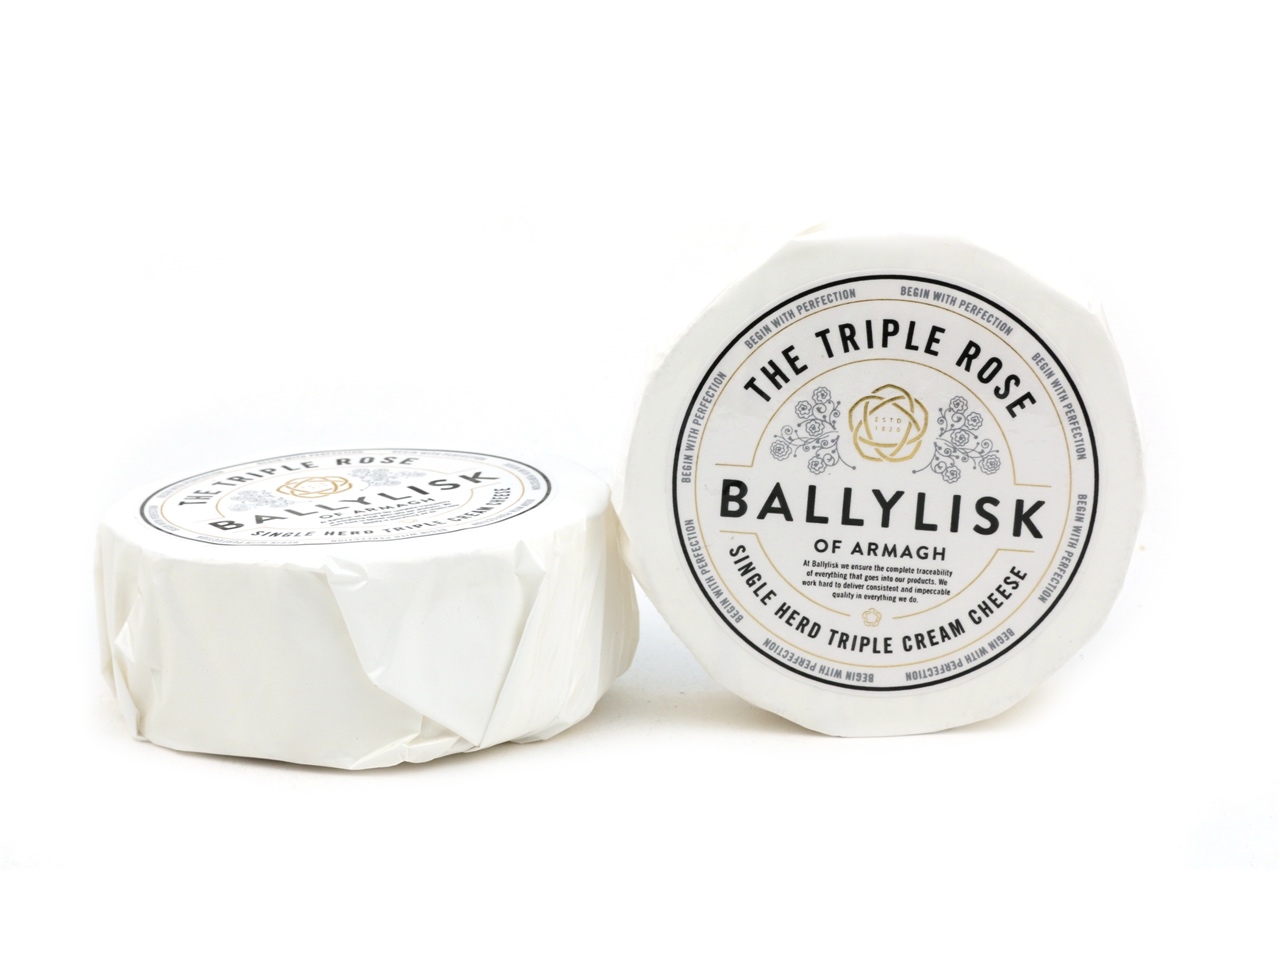 5 new artisan cheeses to look out for